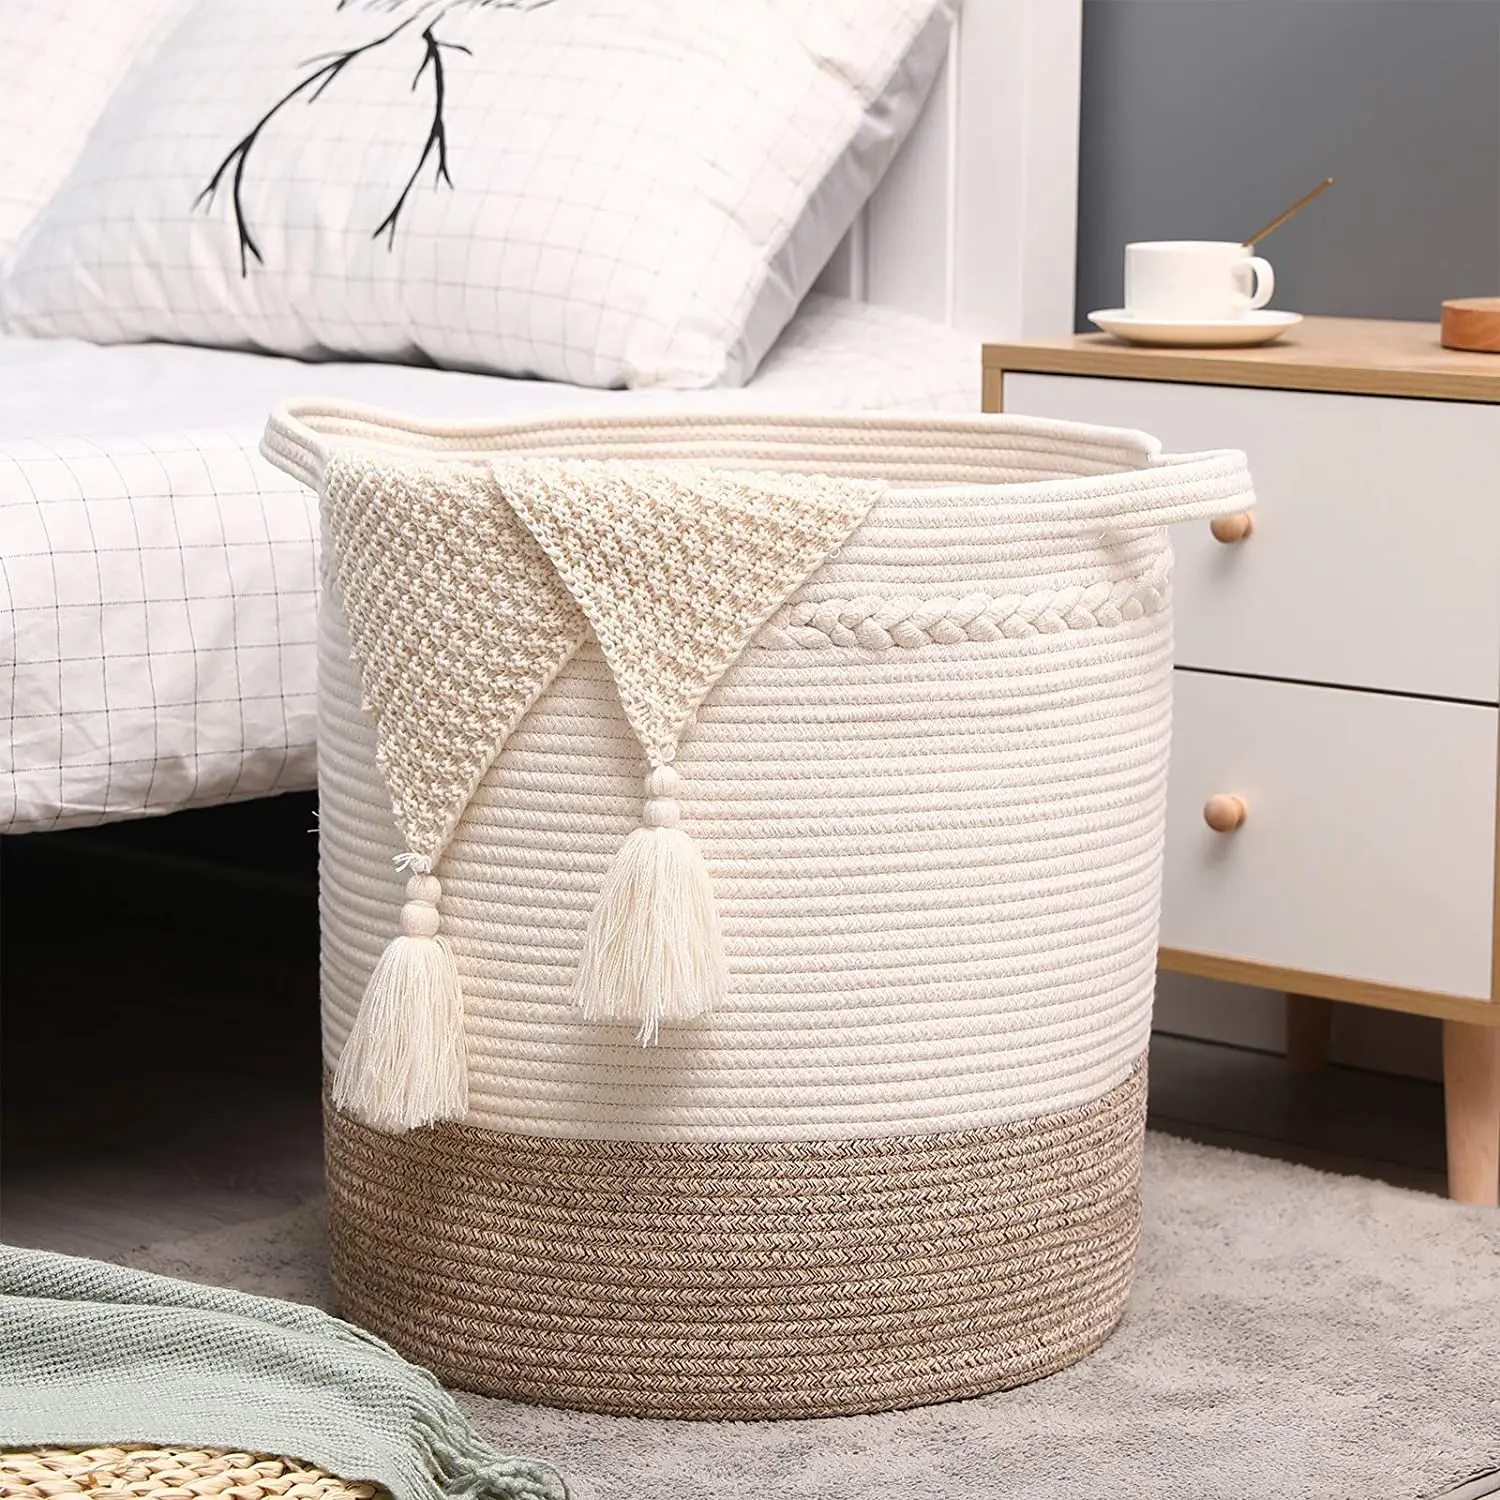 - Cotton Rope Basket Woven Baby Laundry Basket with Handle for Diaper Toy Cute Neutral Home Decor DOKEHOM DKA0624WBL Large Storage Baskets D H 17 White, L x 14.6 